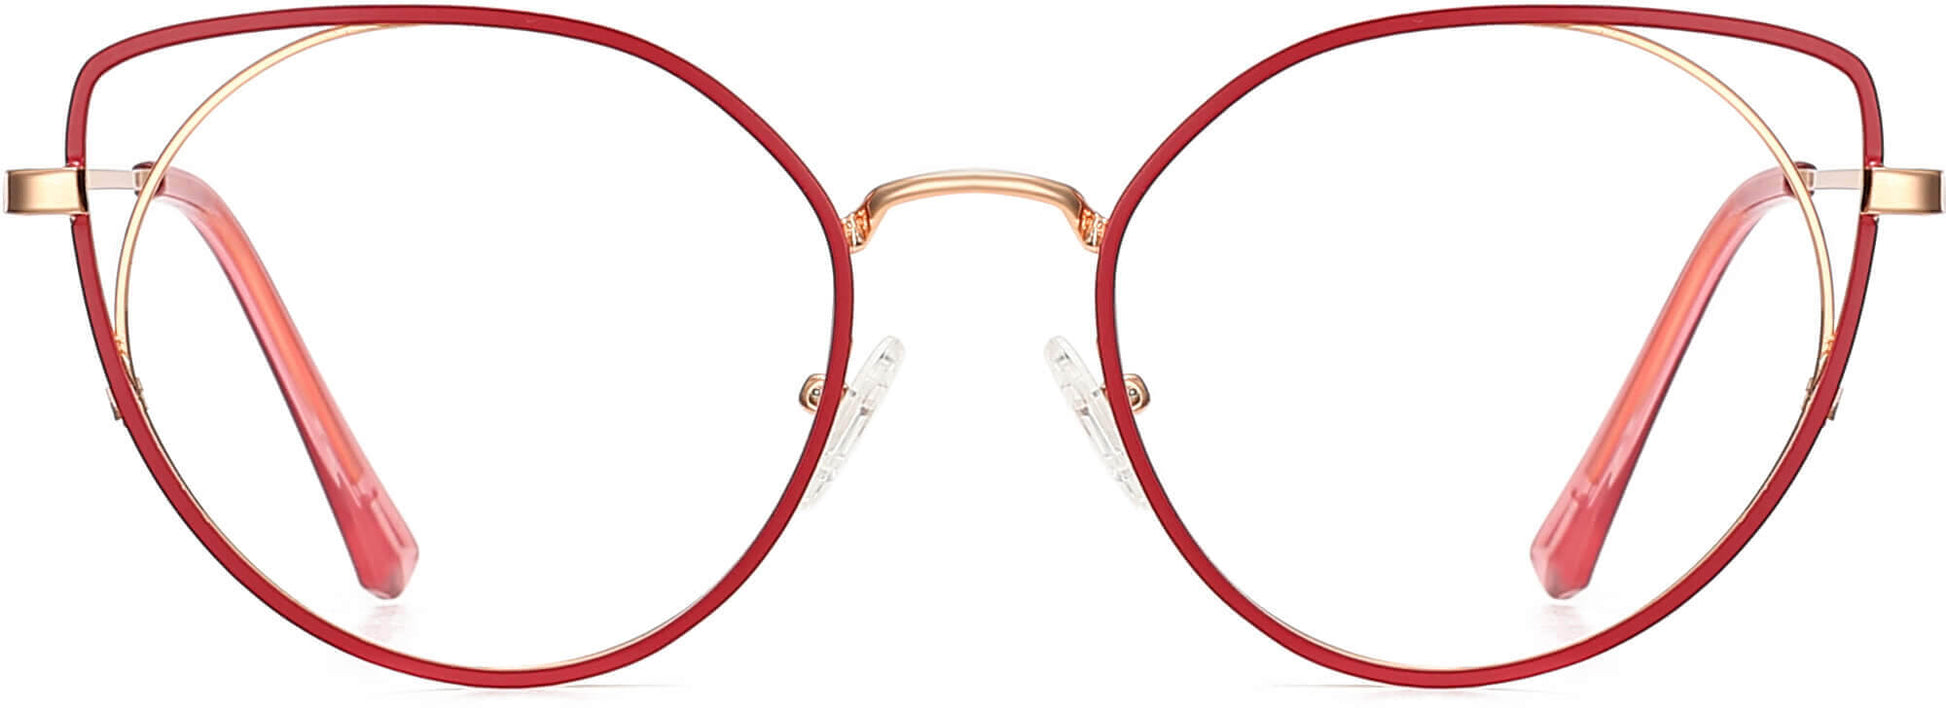 Miko Cateye Red Eyeglasses from ANRRI, front view